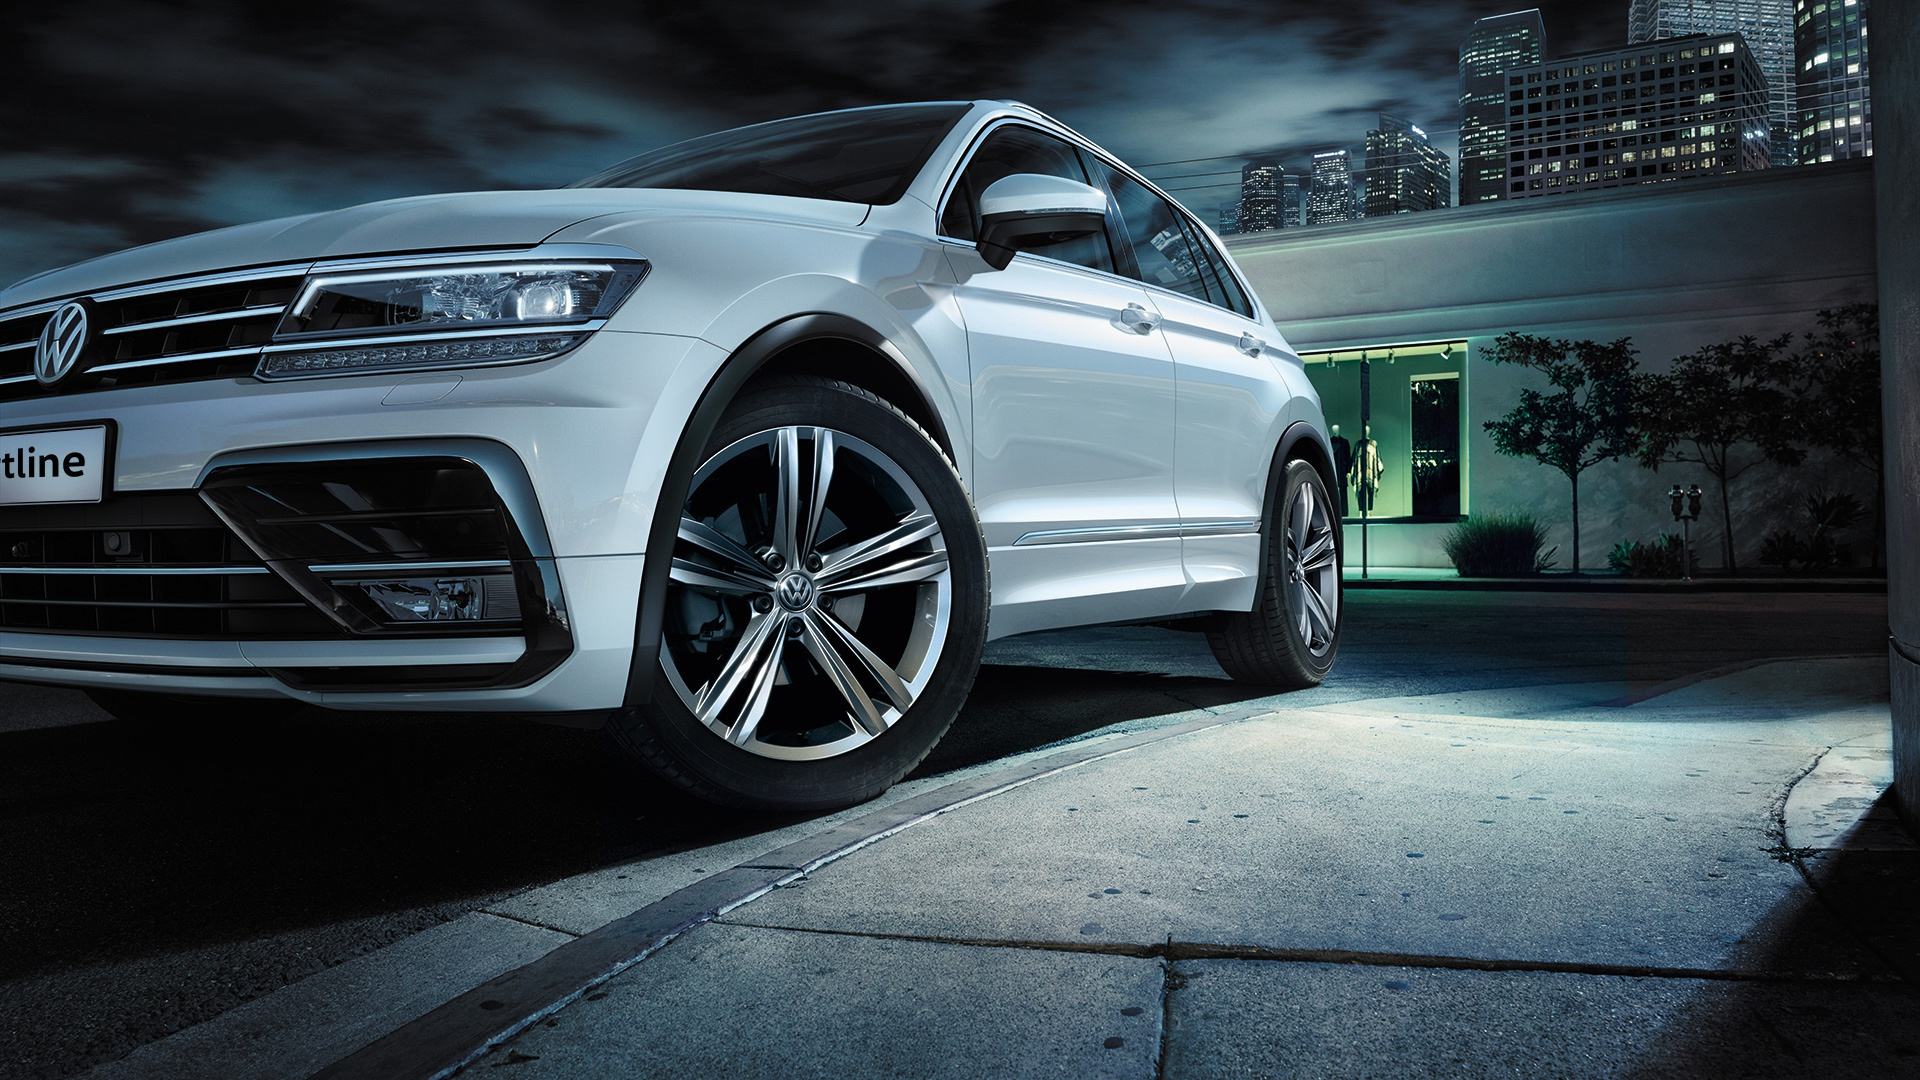 Free photo A white volkswagen tiguan in the night light